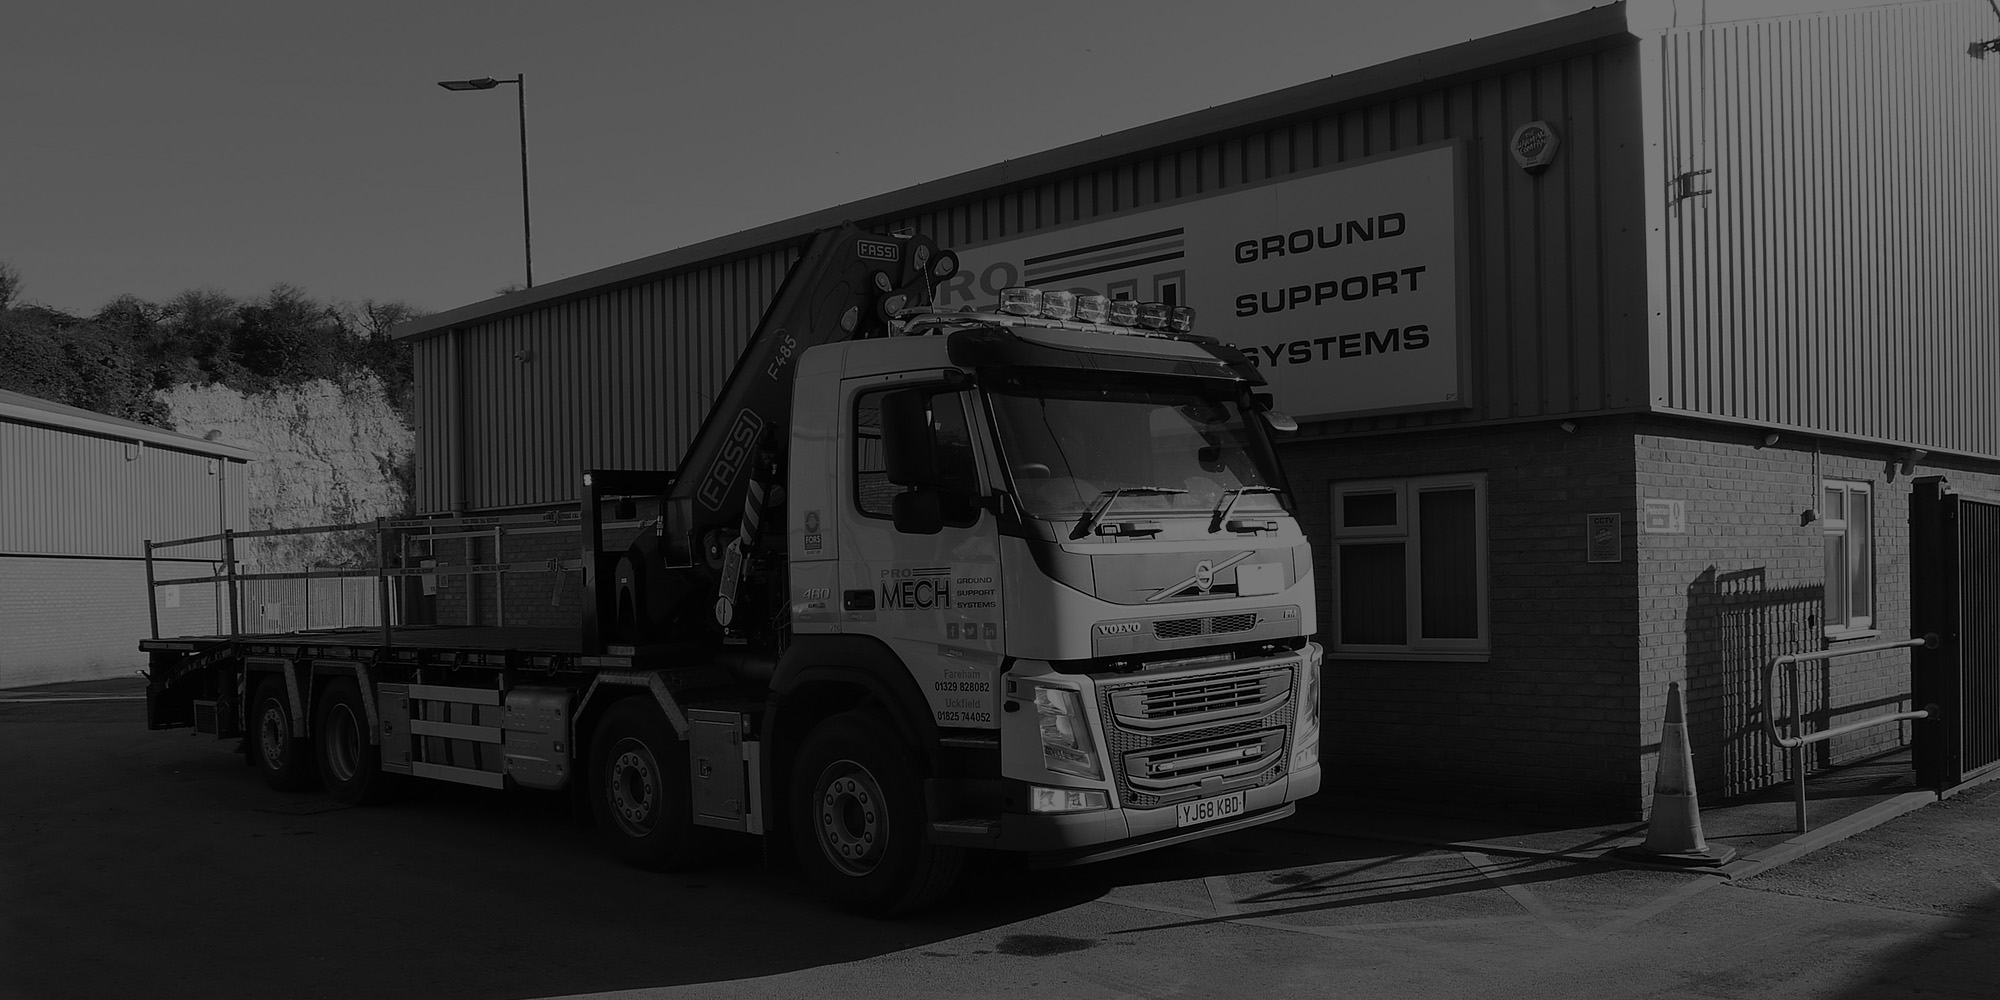 Promech Ground Support Systems - Hire of non mechanical plant equipment - Southampton Hampshire